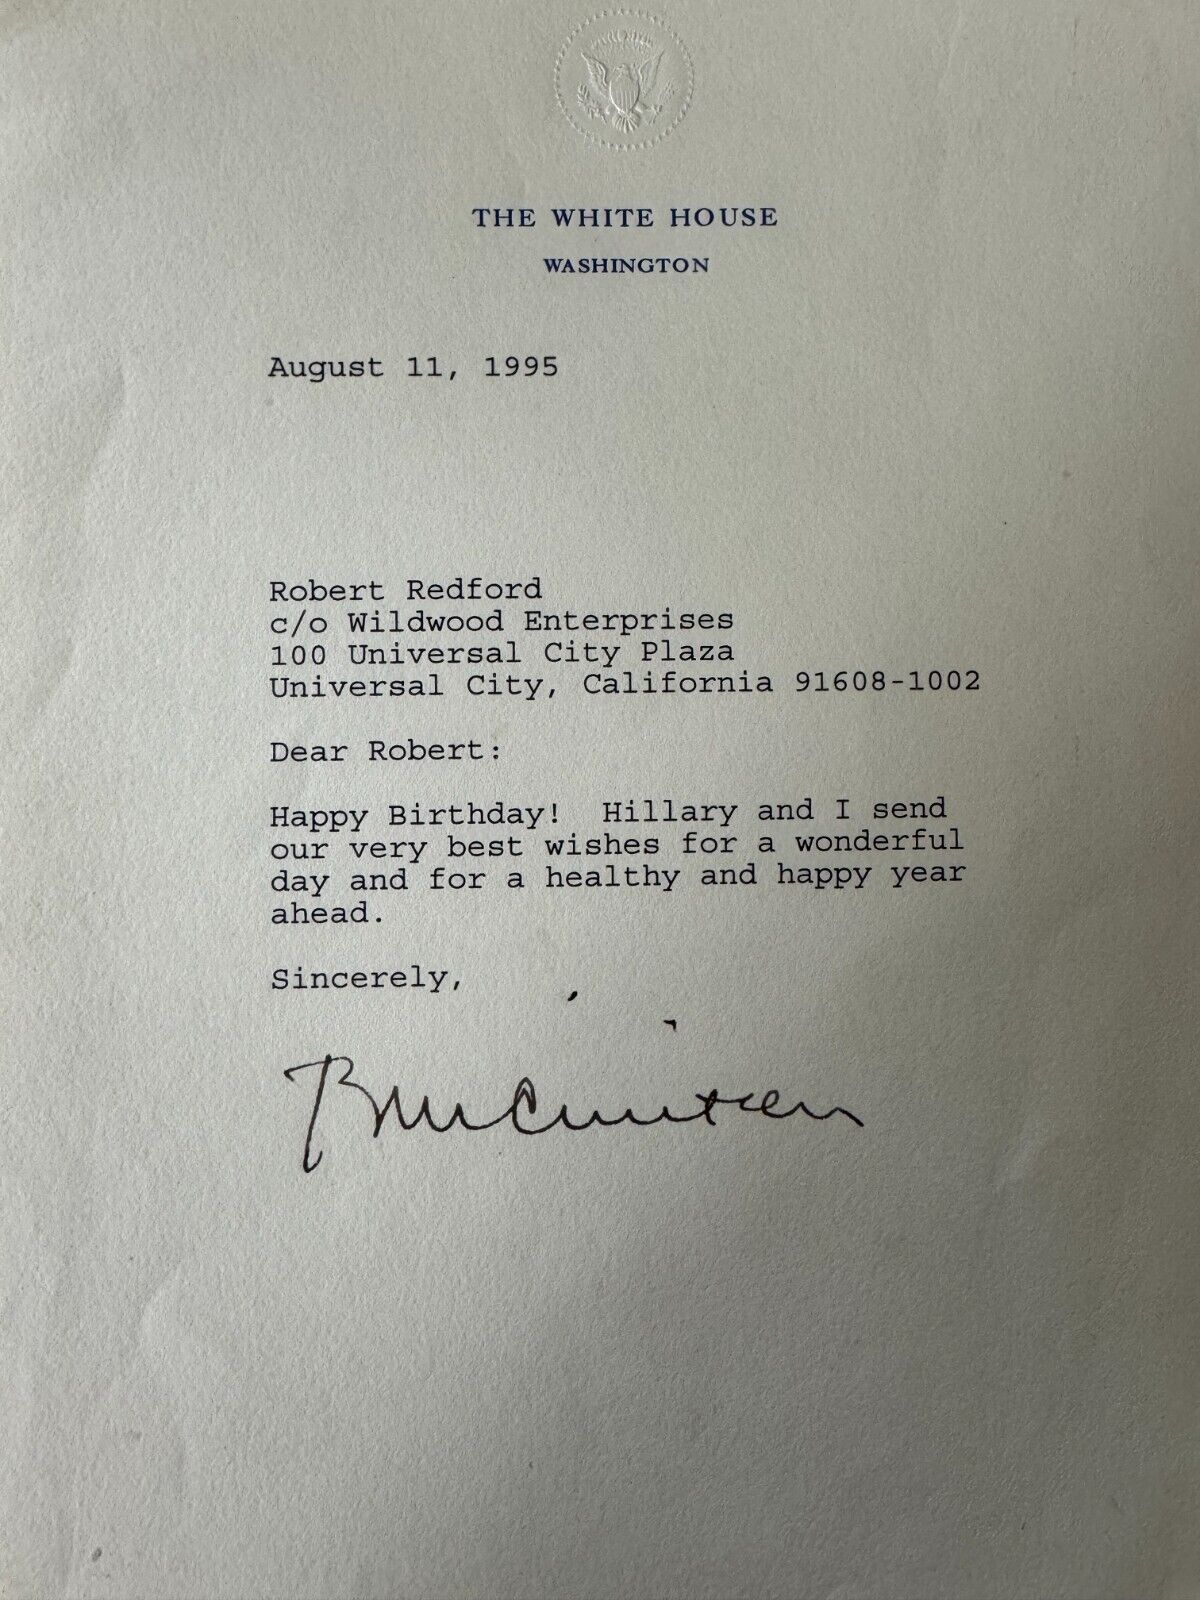 Bill Clinton signed white House Letter to Robert Redford August 11th, 1995